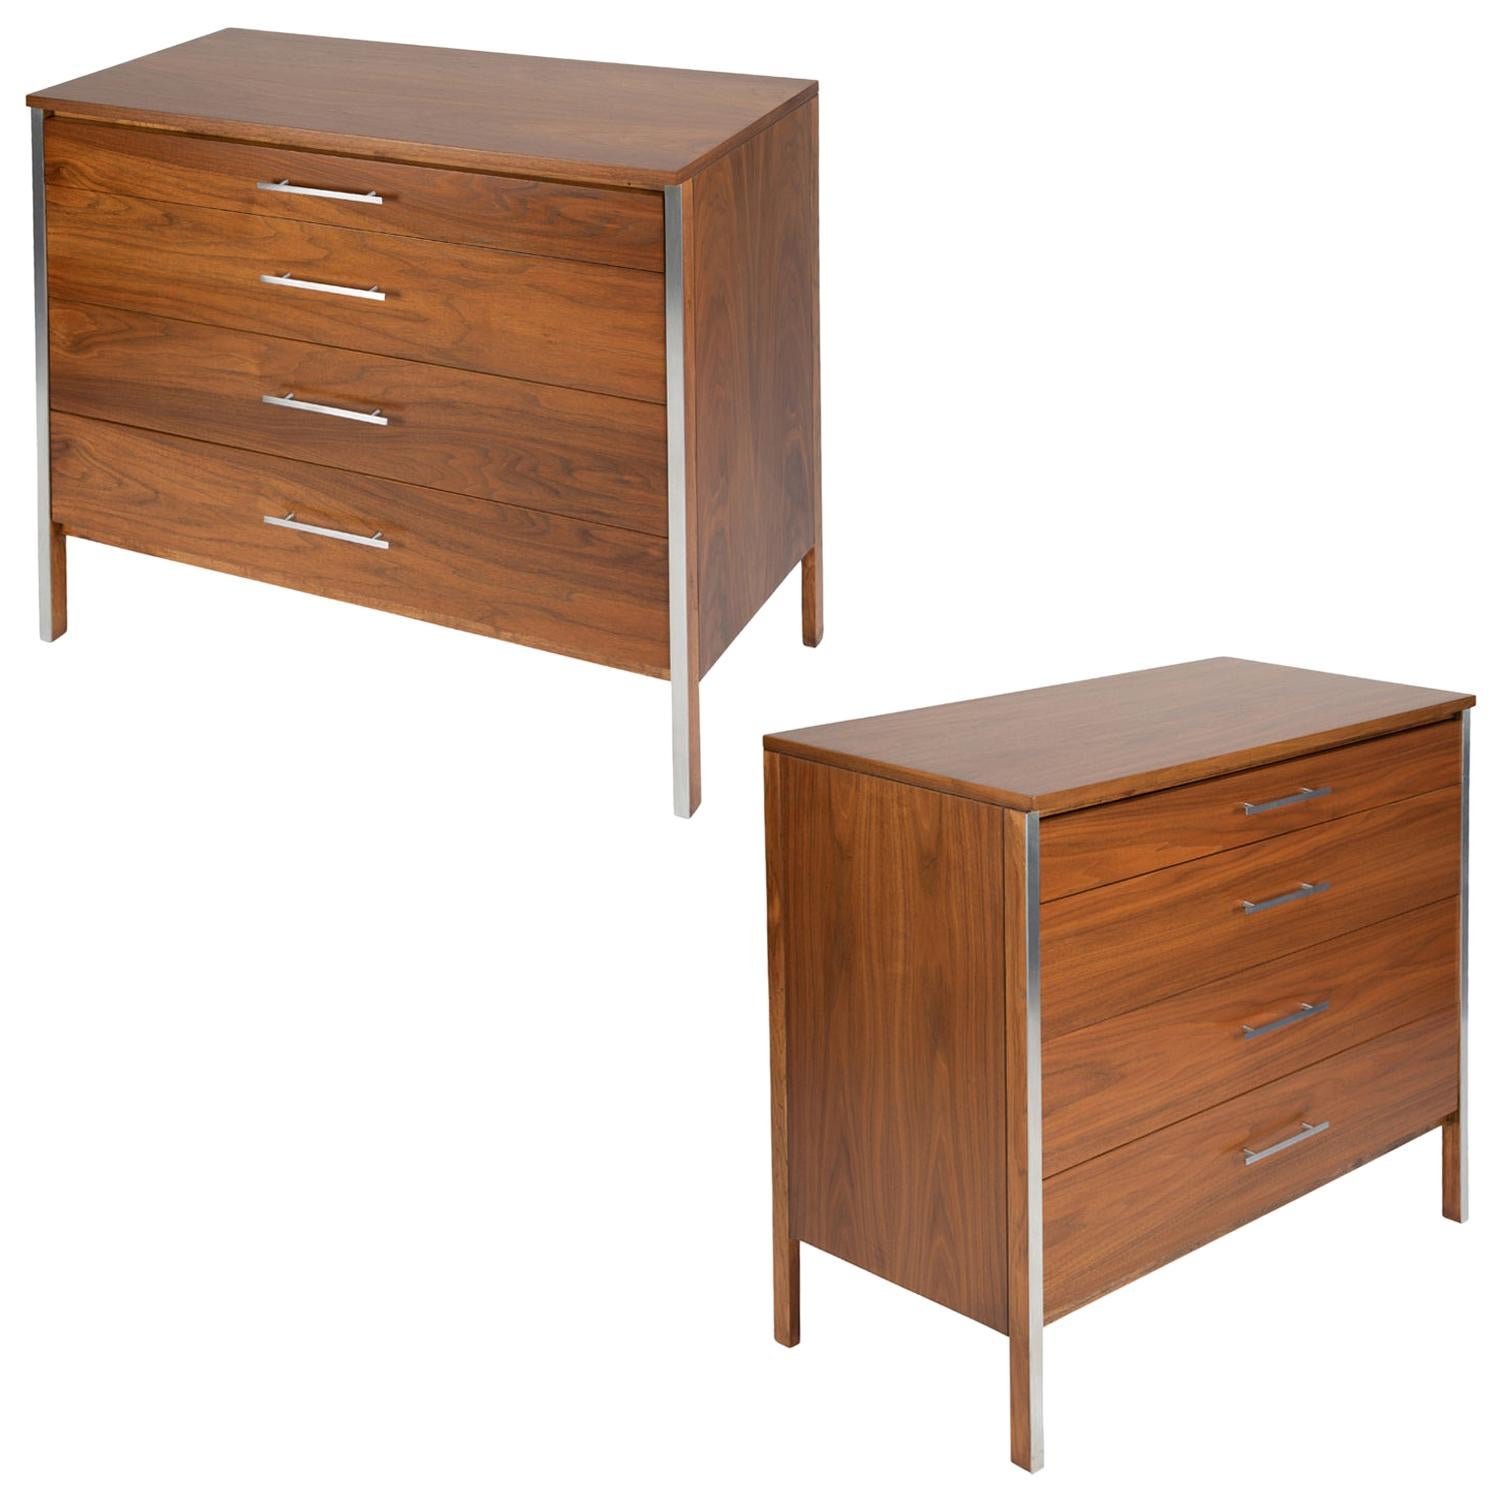 Paul McCobb Pair of Bedside Chests in Walnut and Aluminum, 1960s